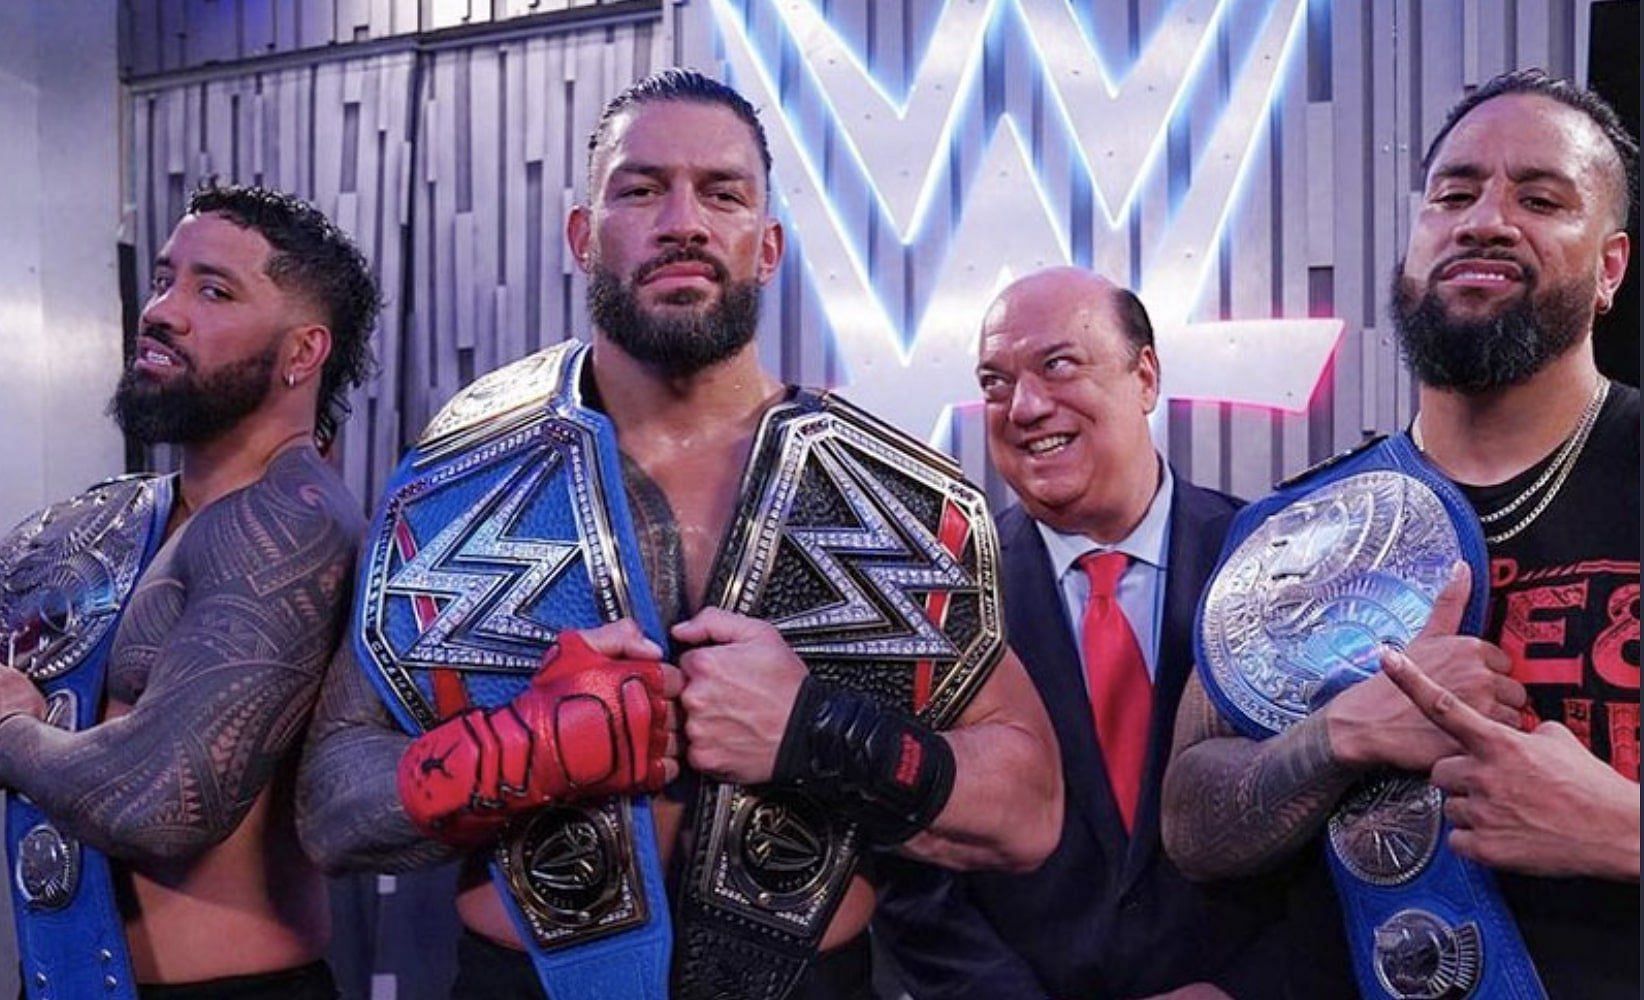 The Bloodline is popular stable in WWE